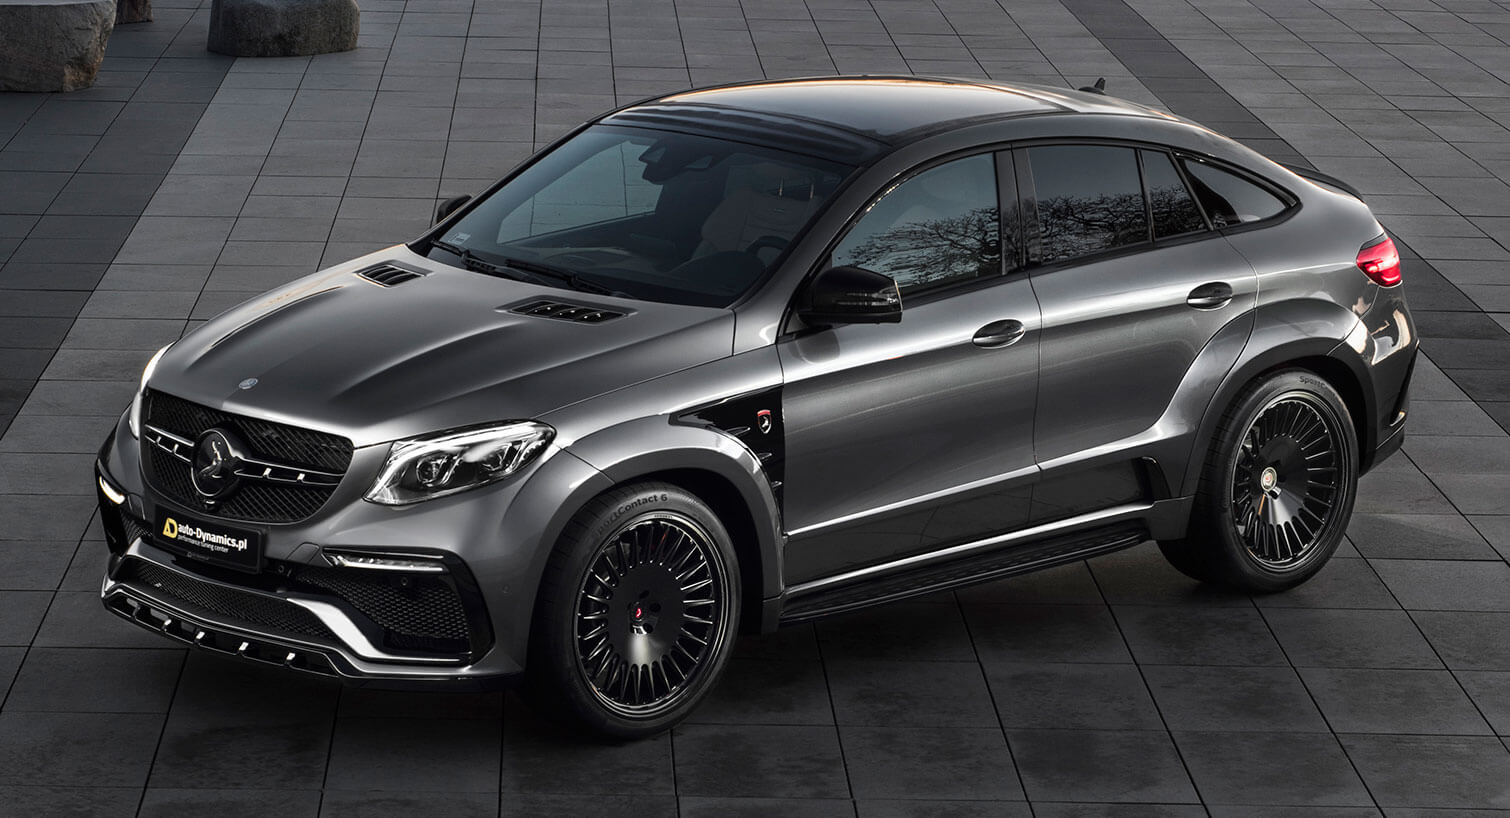 MercedesAMG GLE 63 S Coupe Pumped To 795 HP, Hits 62 MPH In 3.25 Sec